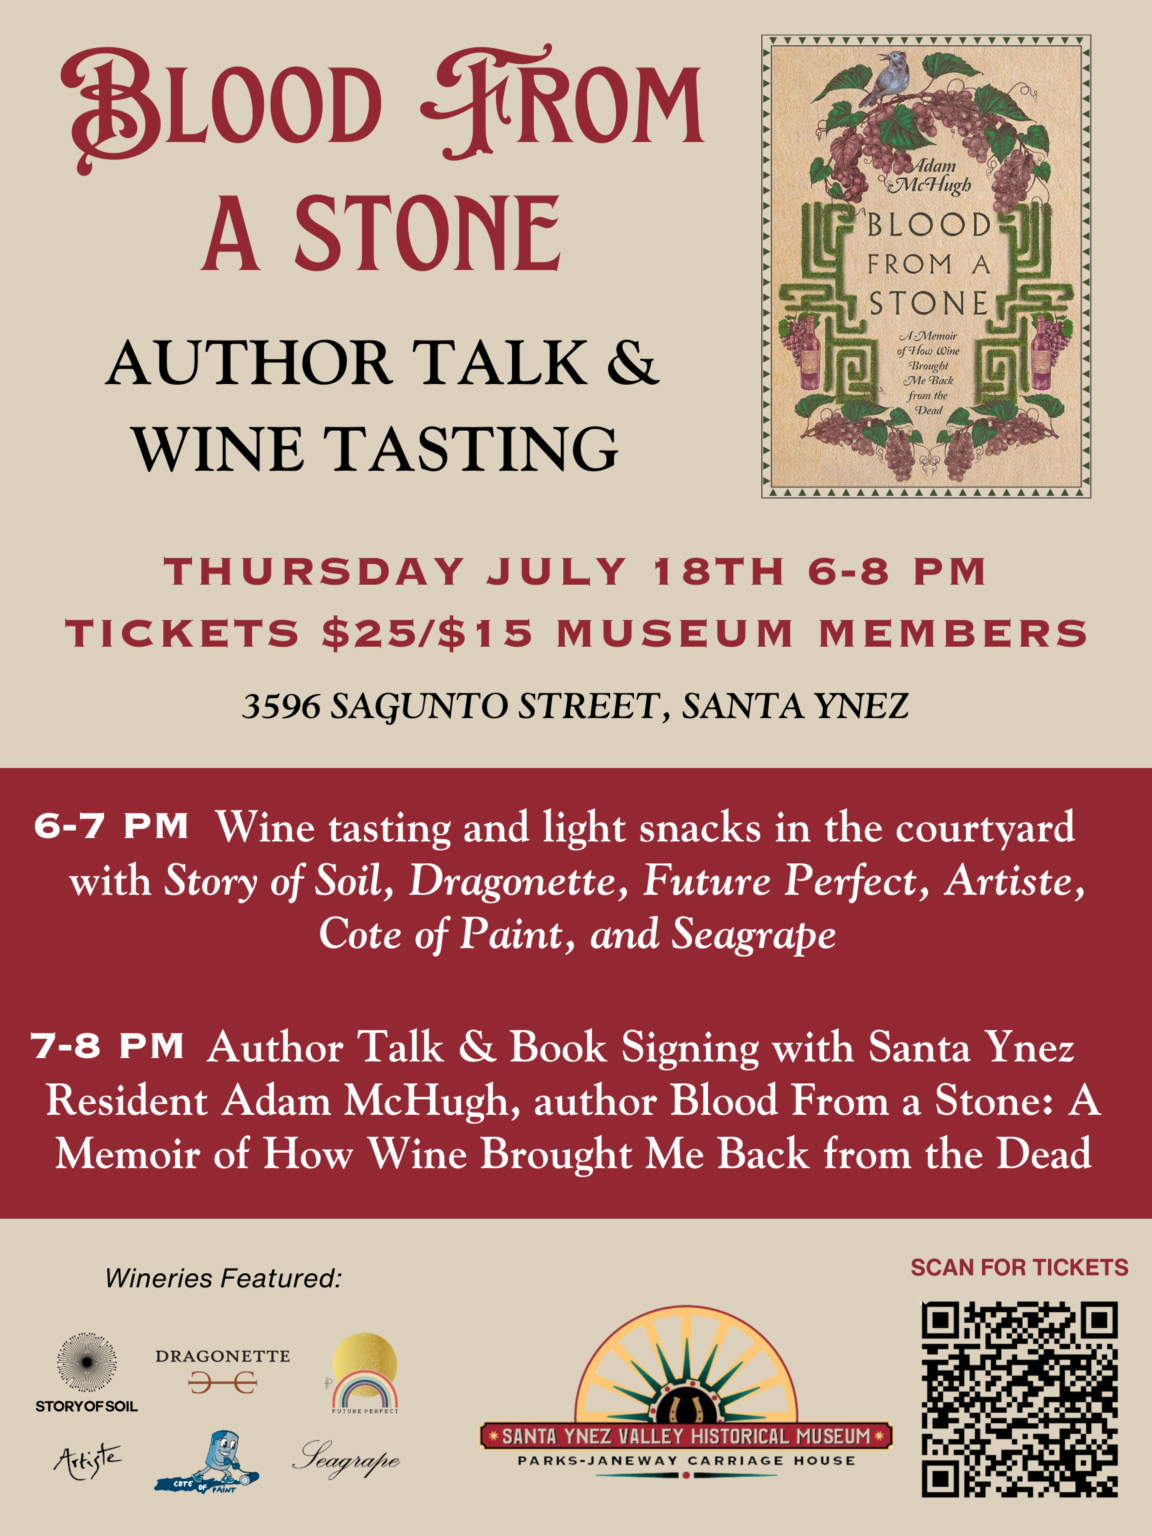 Blood-From-a-Stone author talk, Santa yNez Valley Historical Museum